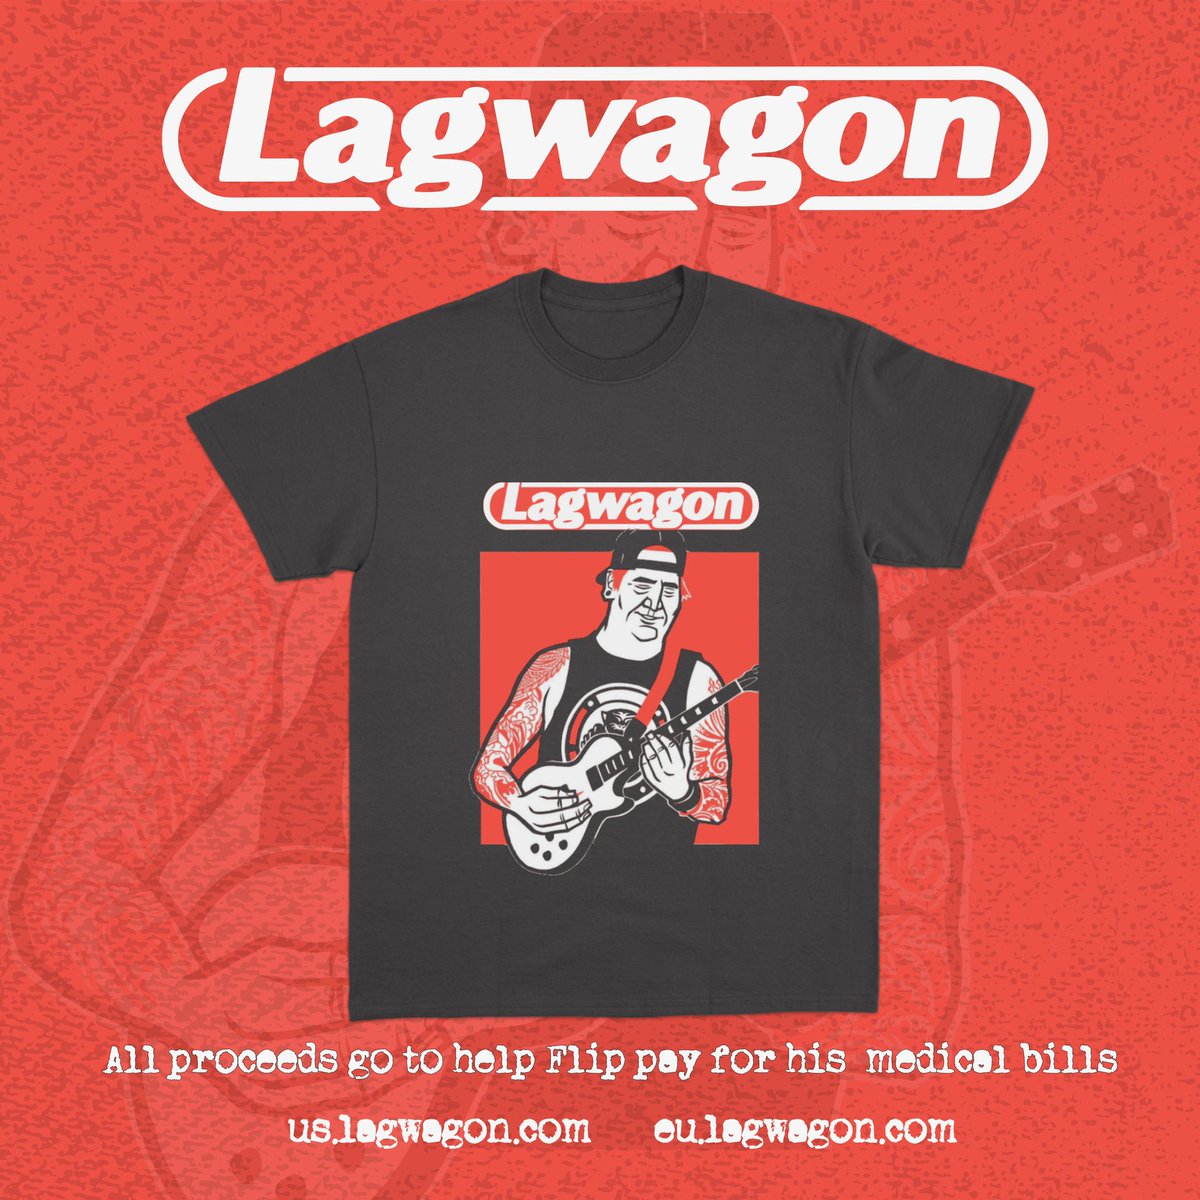 Grab this sick shirt and help the Big Guy to cover his medical bills!  All proceeds go to helping support Flip as he continues his recovery.  Visit either our US merch store us.lagwagon.com or our EU store eu.lagwagon.com 💪🏽🔥👍🏽 #Flip #flippin #lagwagon